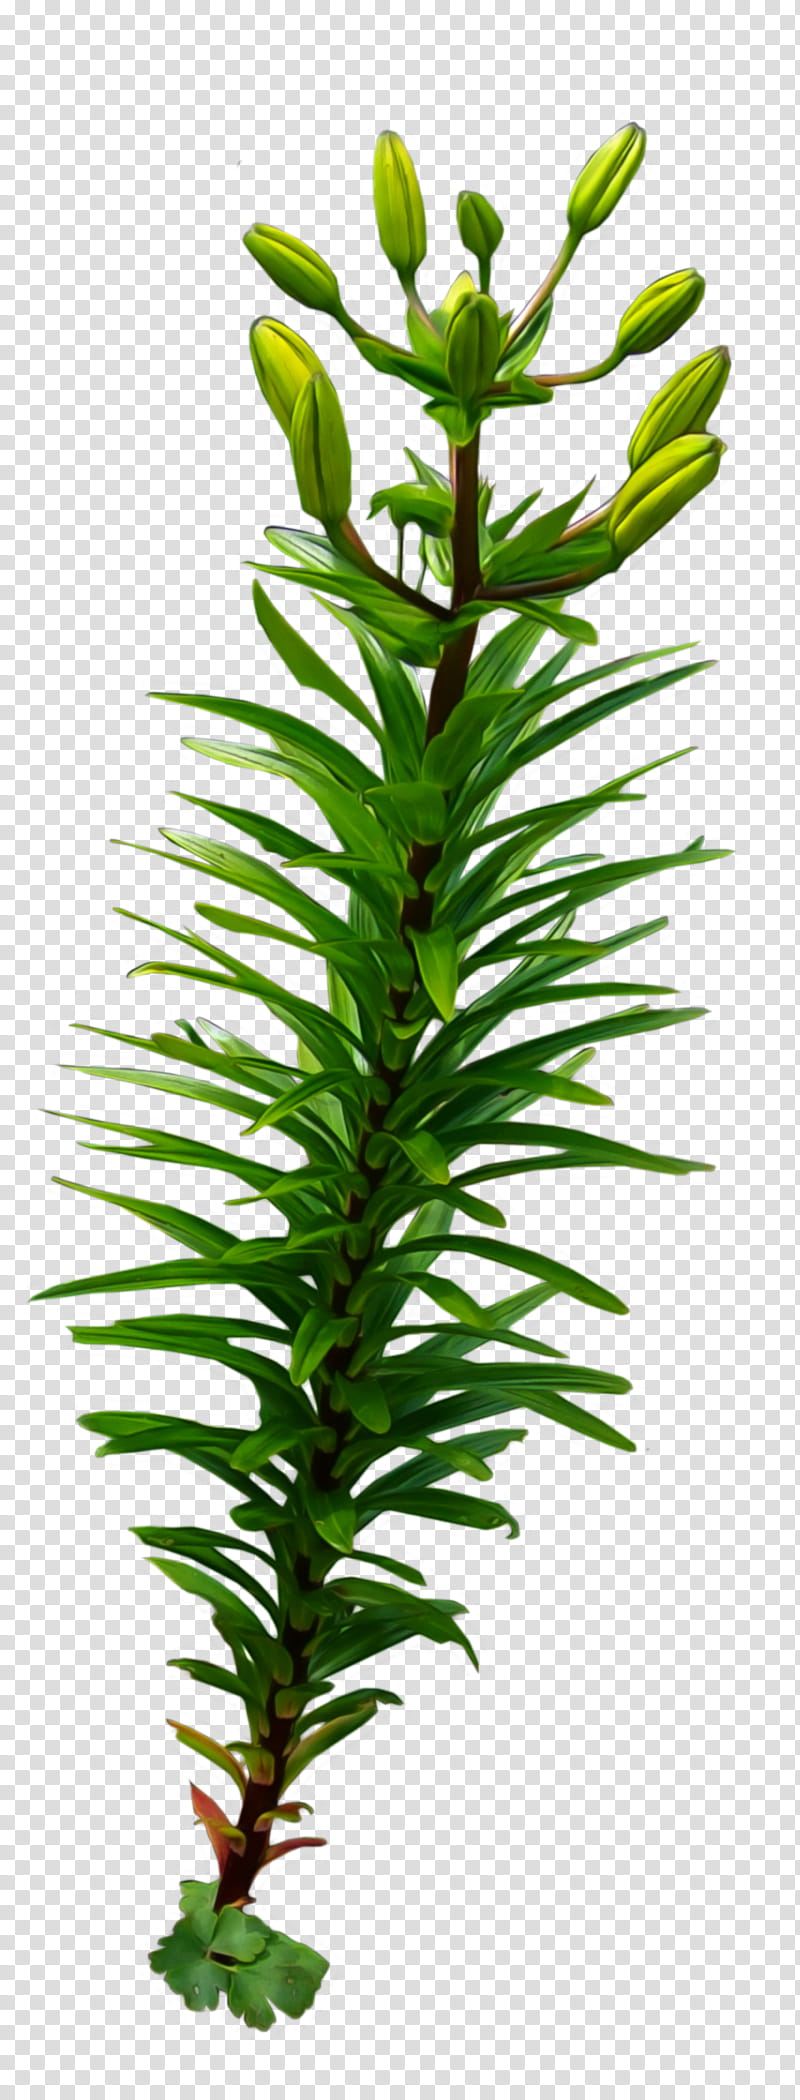 Long Leafy Plant, green leafed plant transparent background PNG clipart